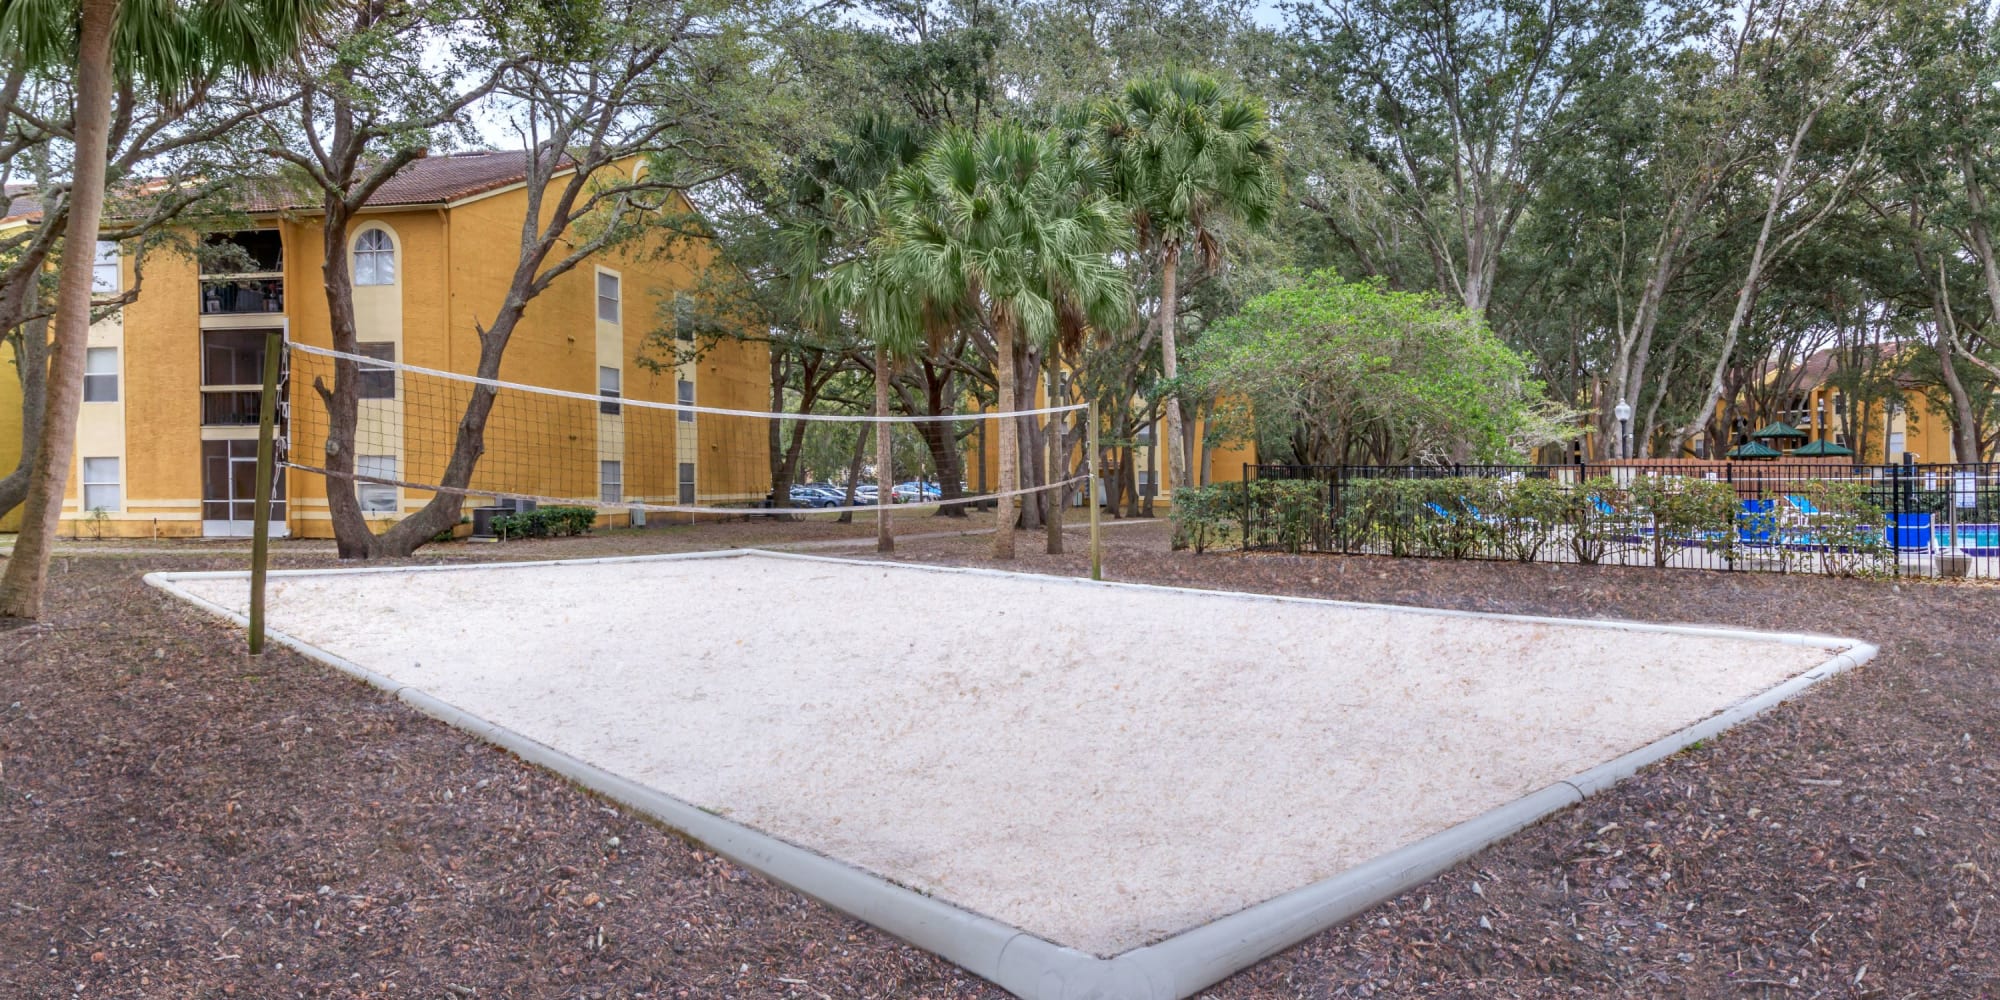 Sand volleyball court at Images Condominiums in Kissimmee, Florida